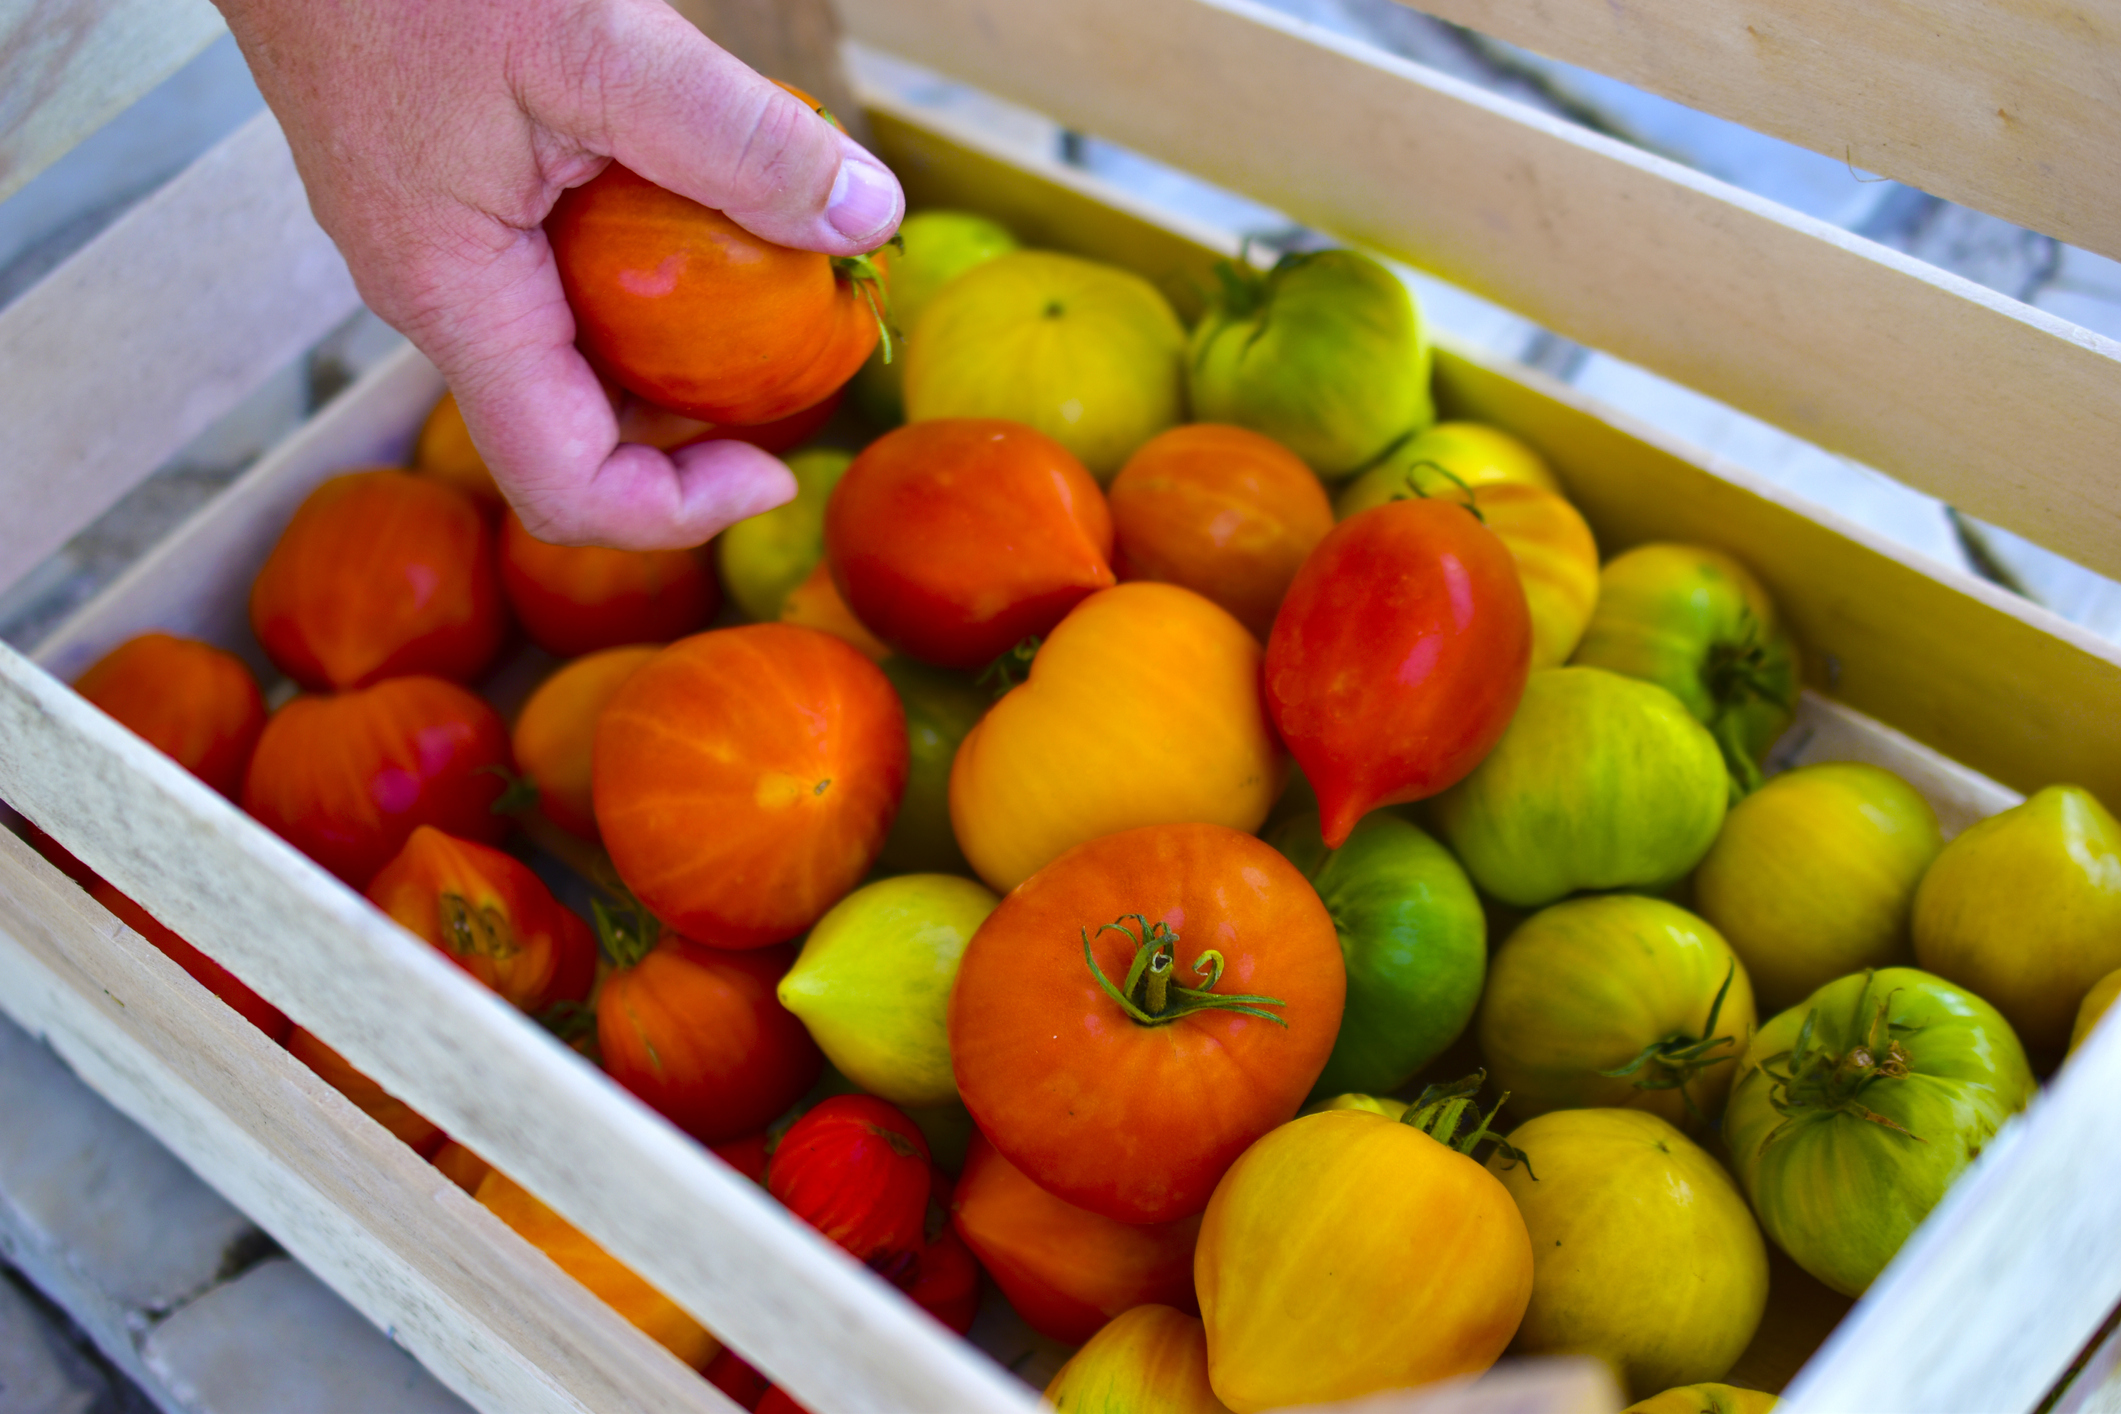 Yellow red and green tomatoes in a wooden box